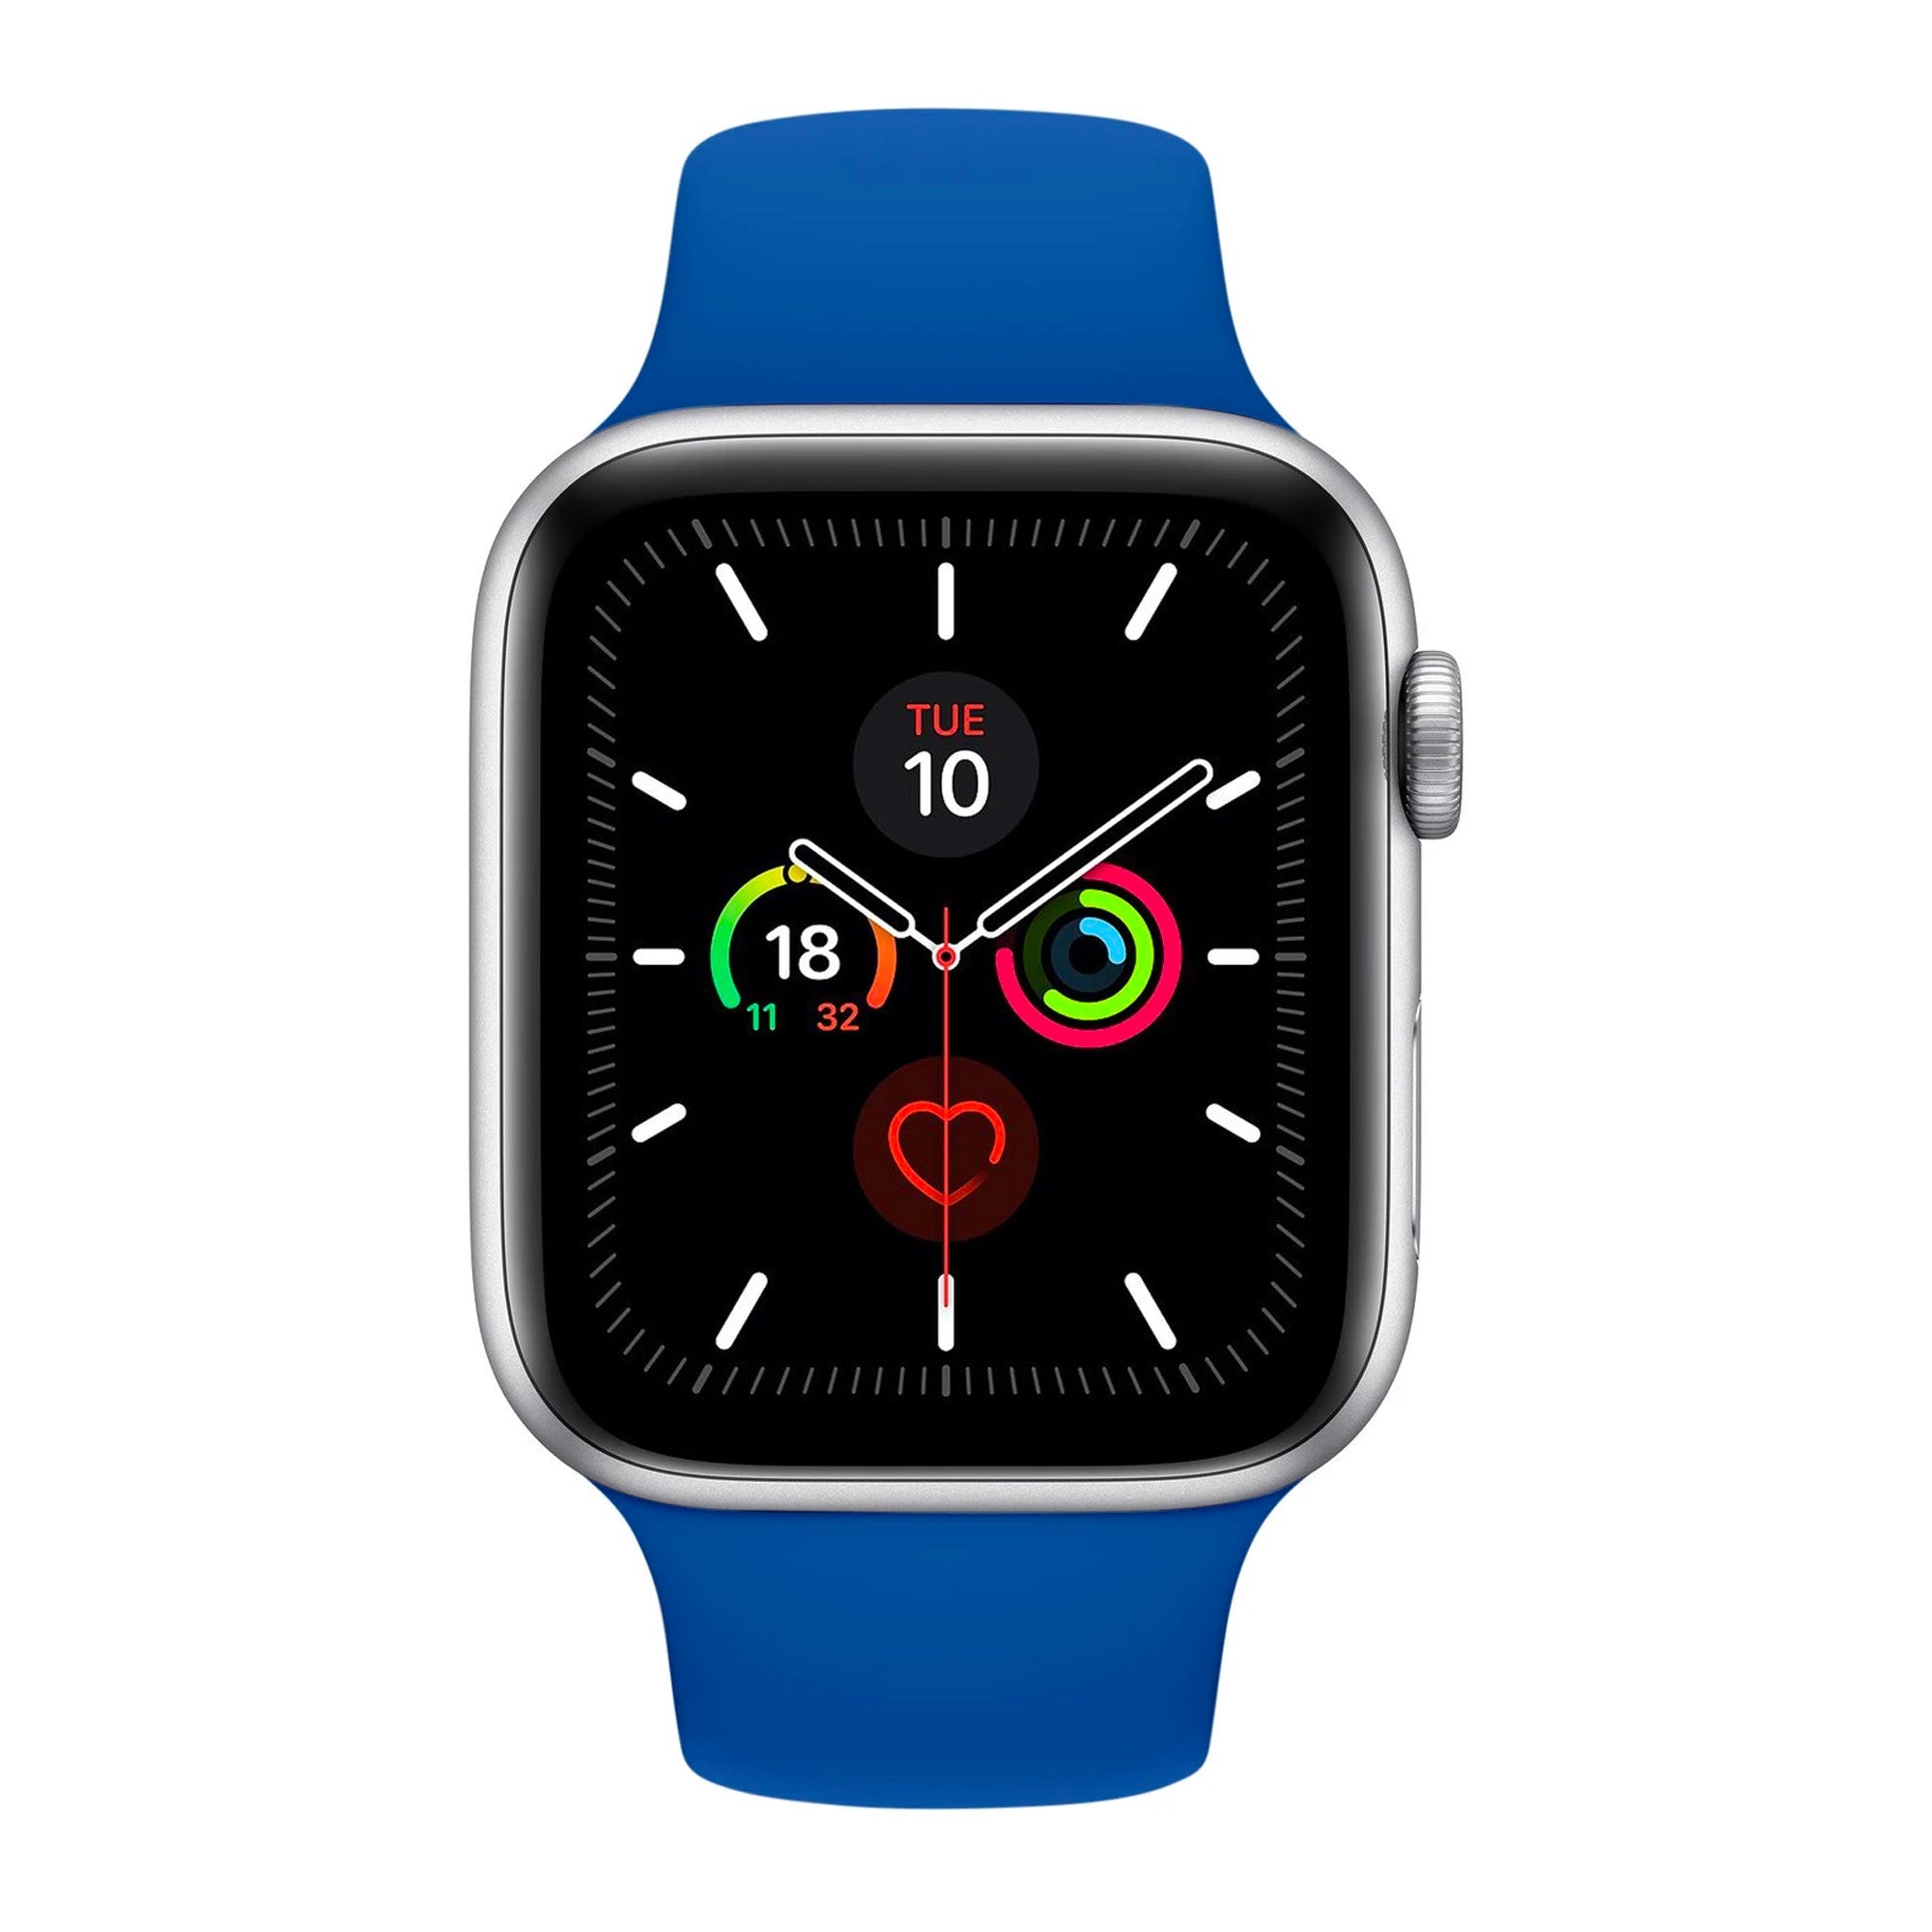 Royal Blue Silicone Band for Apple Watch Silicone Bands   Accessories Gifts UK